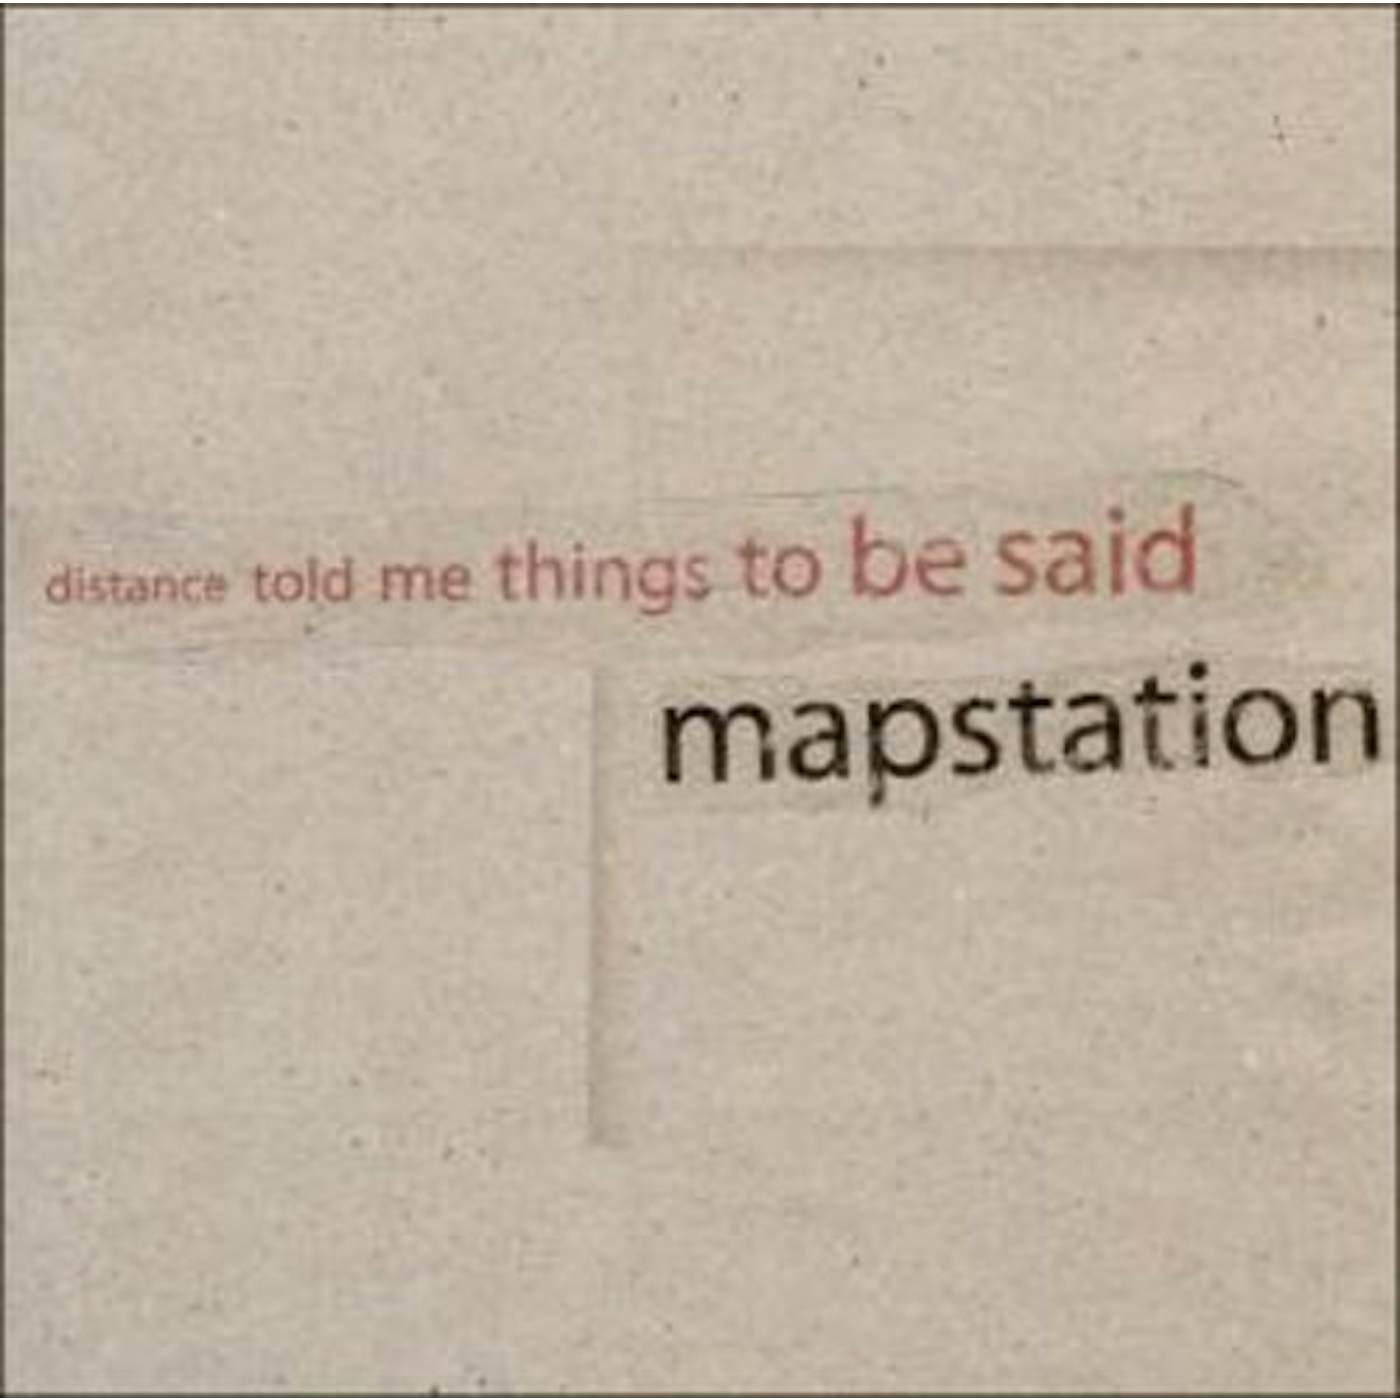 Mapstation DISTANCE TOLD ME THING TO BE SAID Vinyl Record